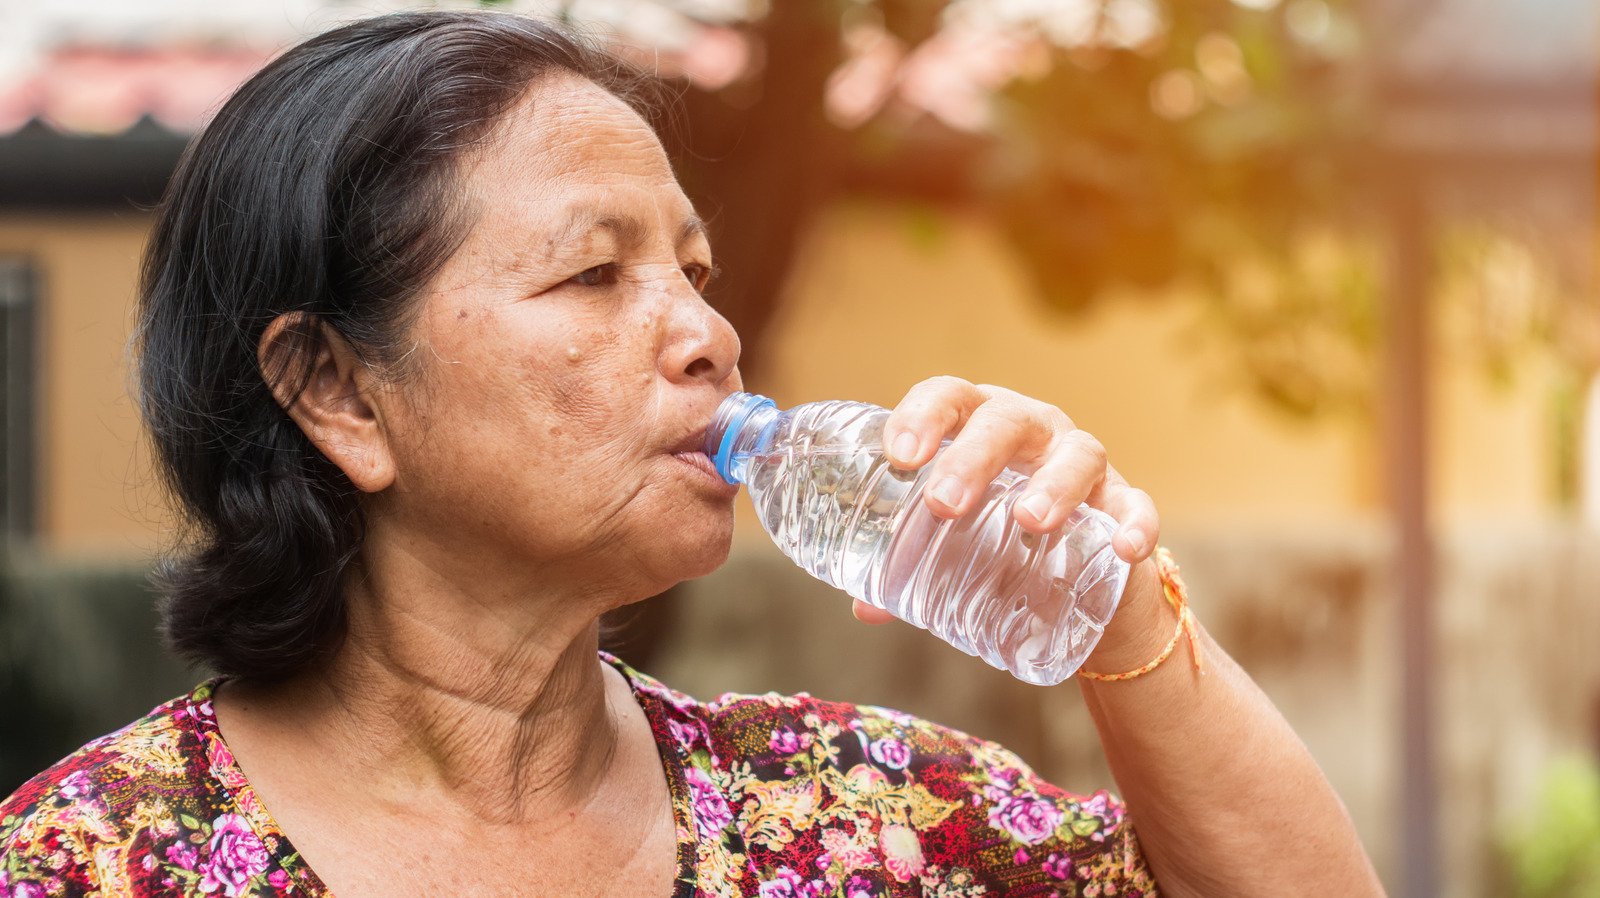 Can Good Hydration Slow The Aging Process? Here's What Experts Say